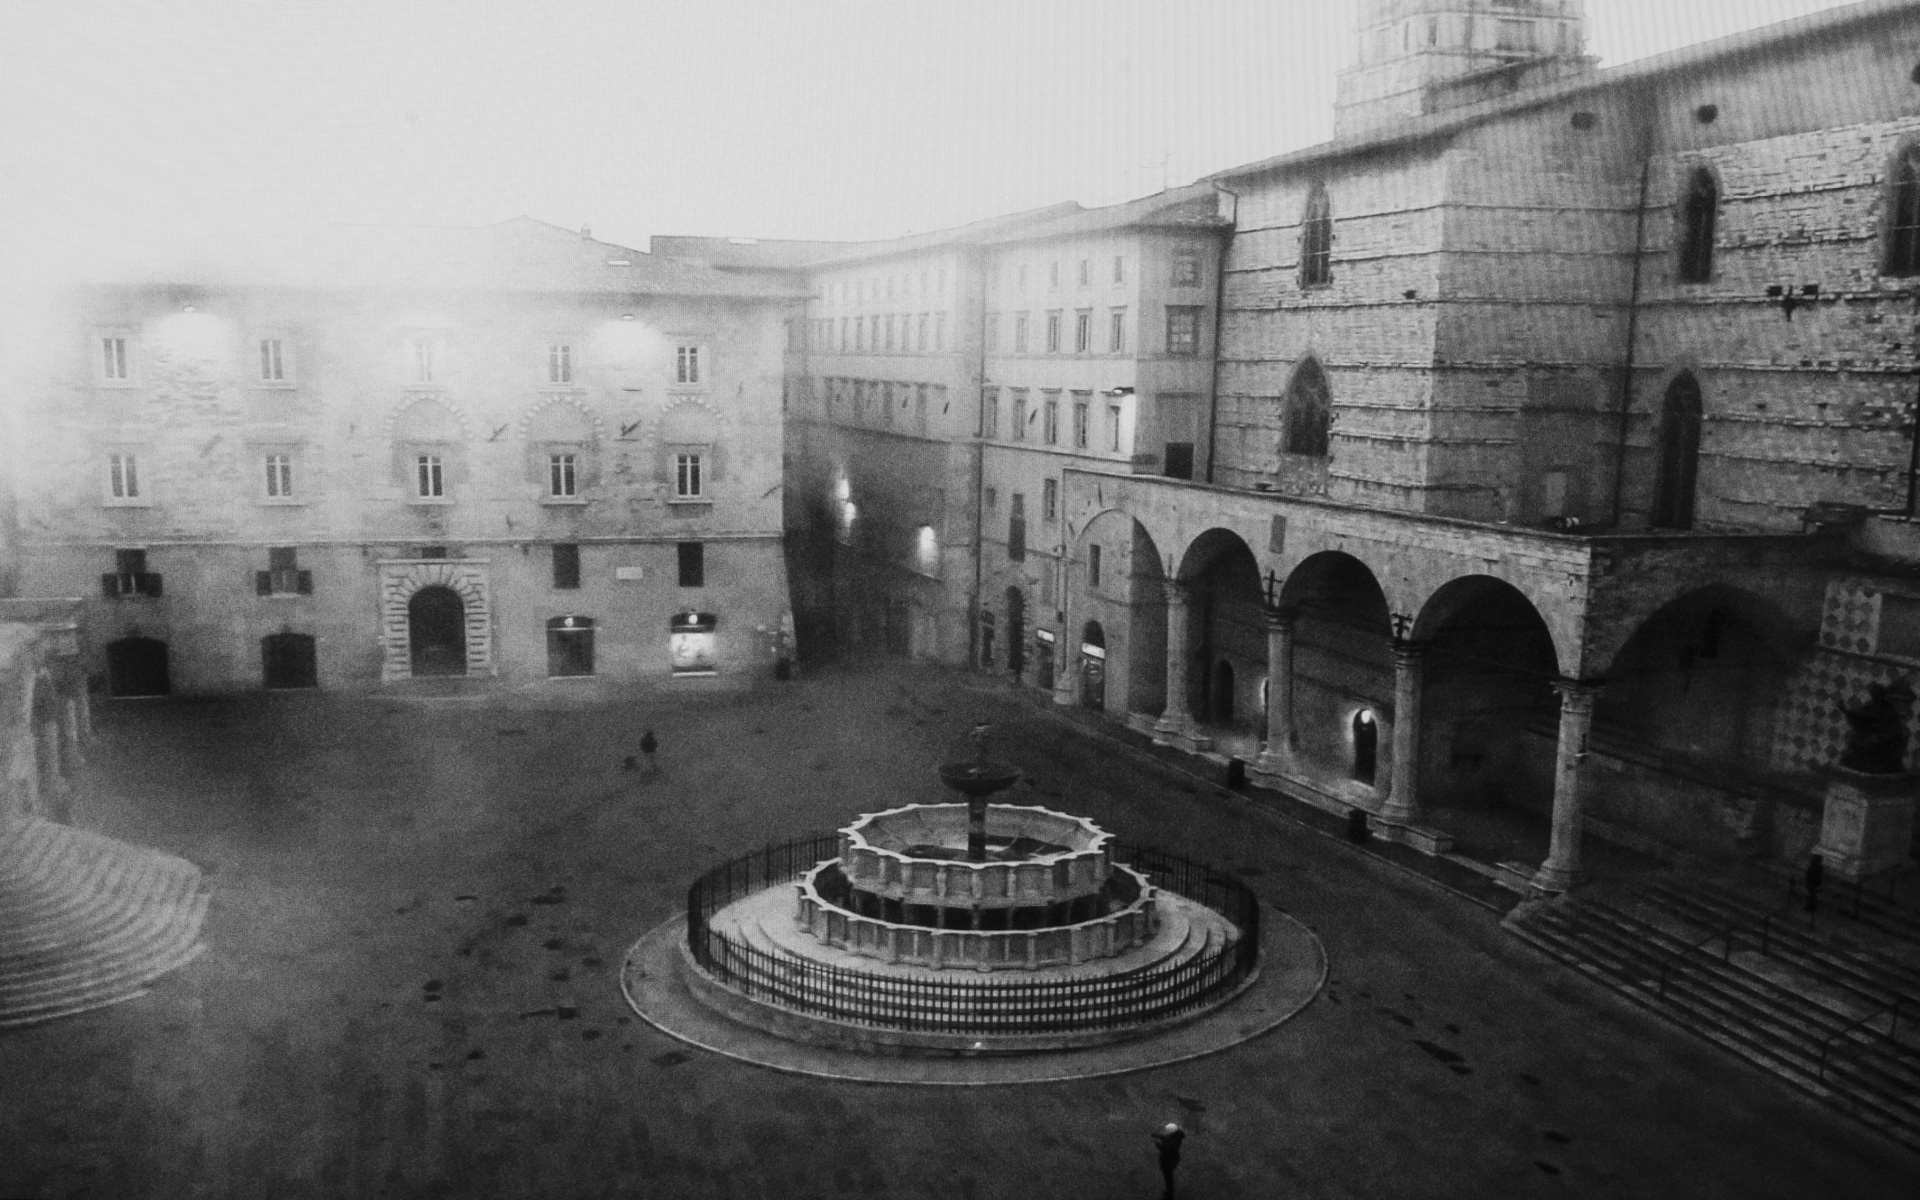 Perugia, Square of the 4th November - Man navigating his drone, seen as white dot, on an empty square to take a top-down photograph of Magiorre fountain. Perugia, Italy. March 25. 2020